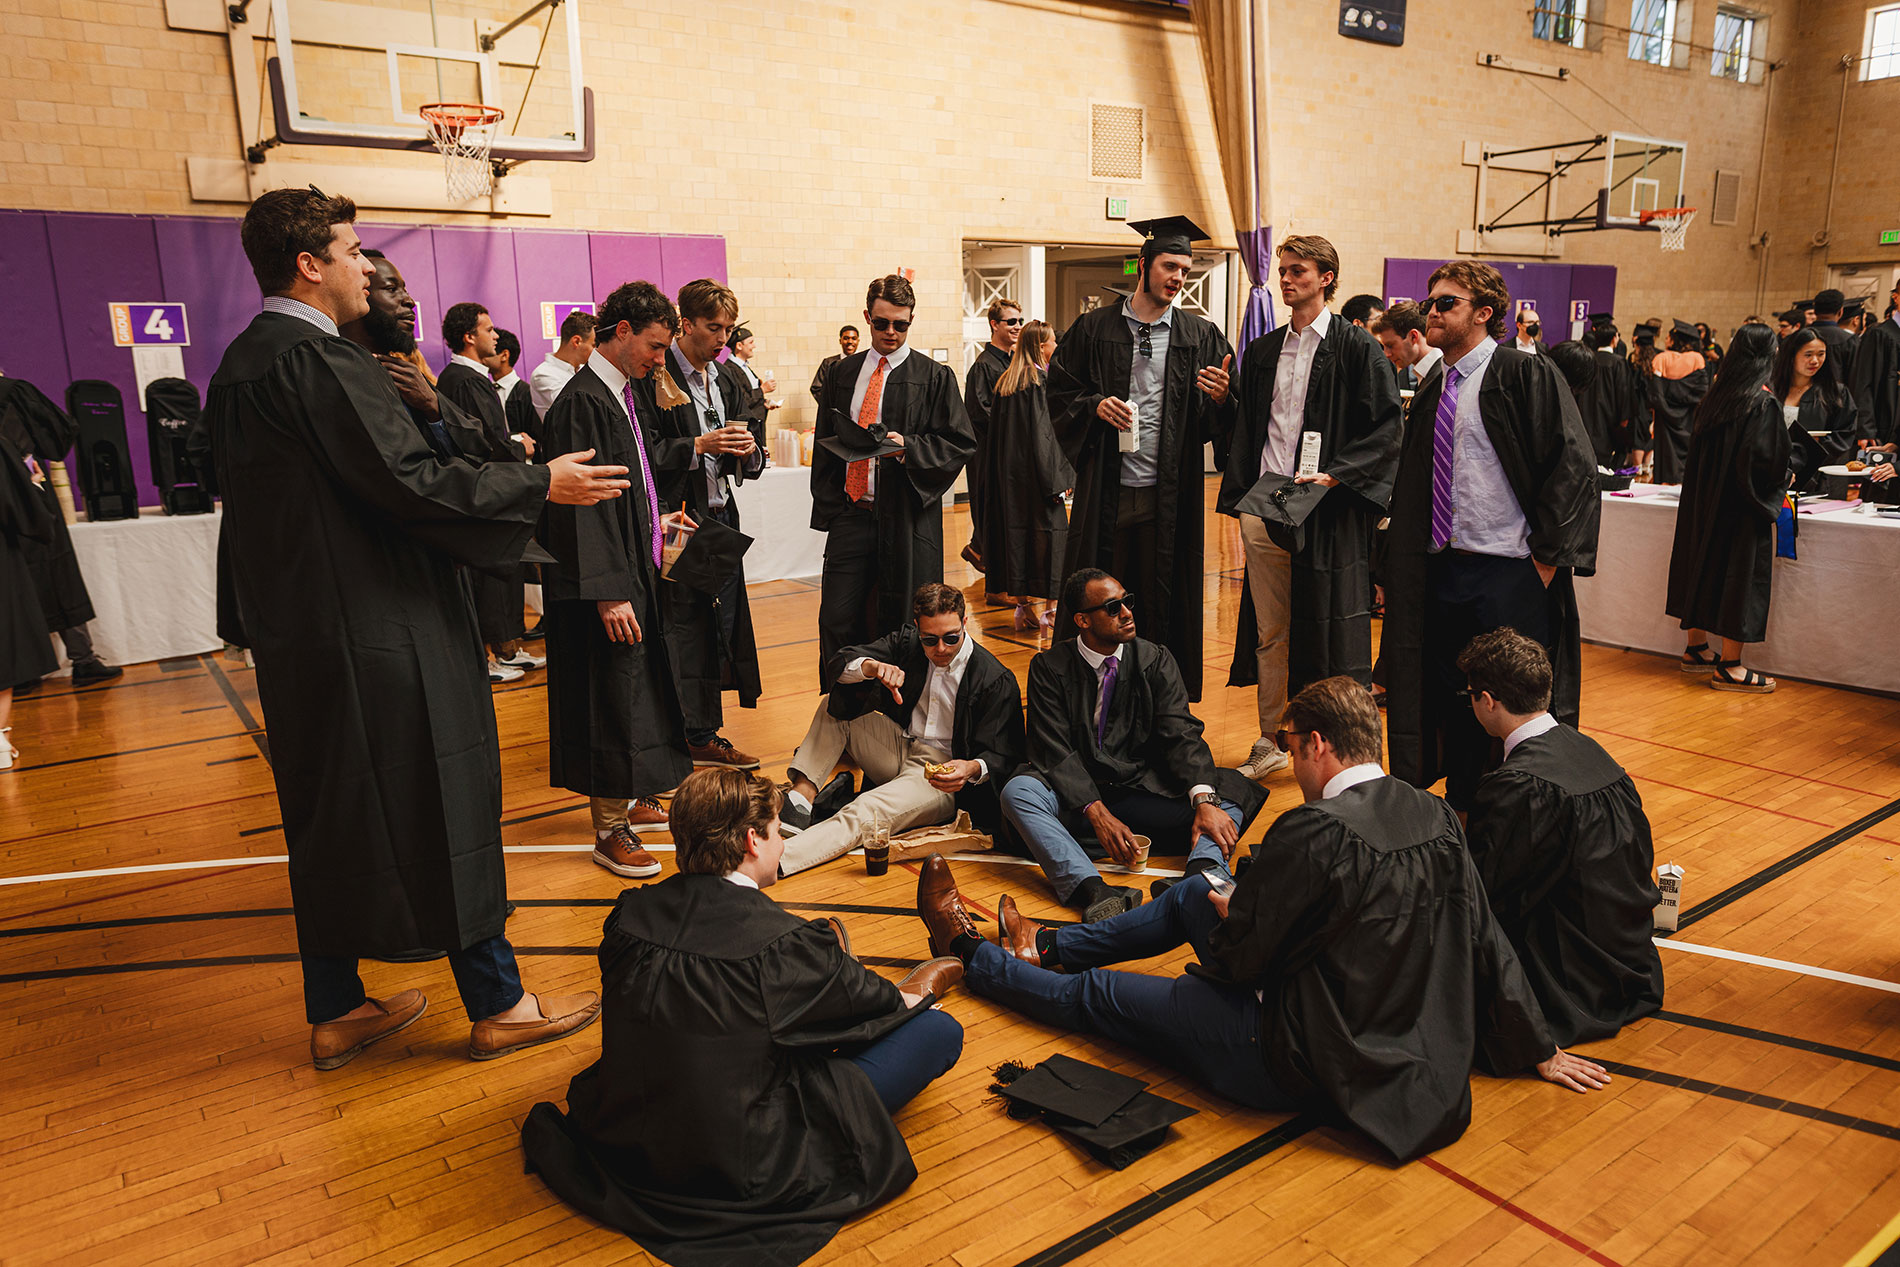 Graduates standing and sitting inside the Alumni Gym before Commencement.